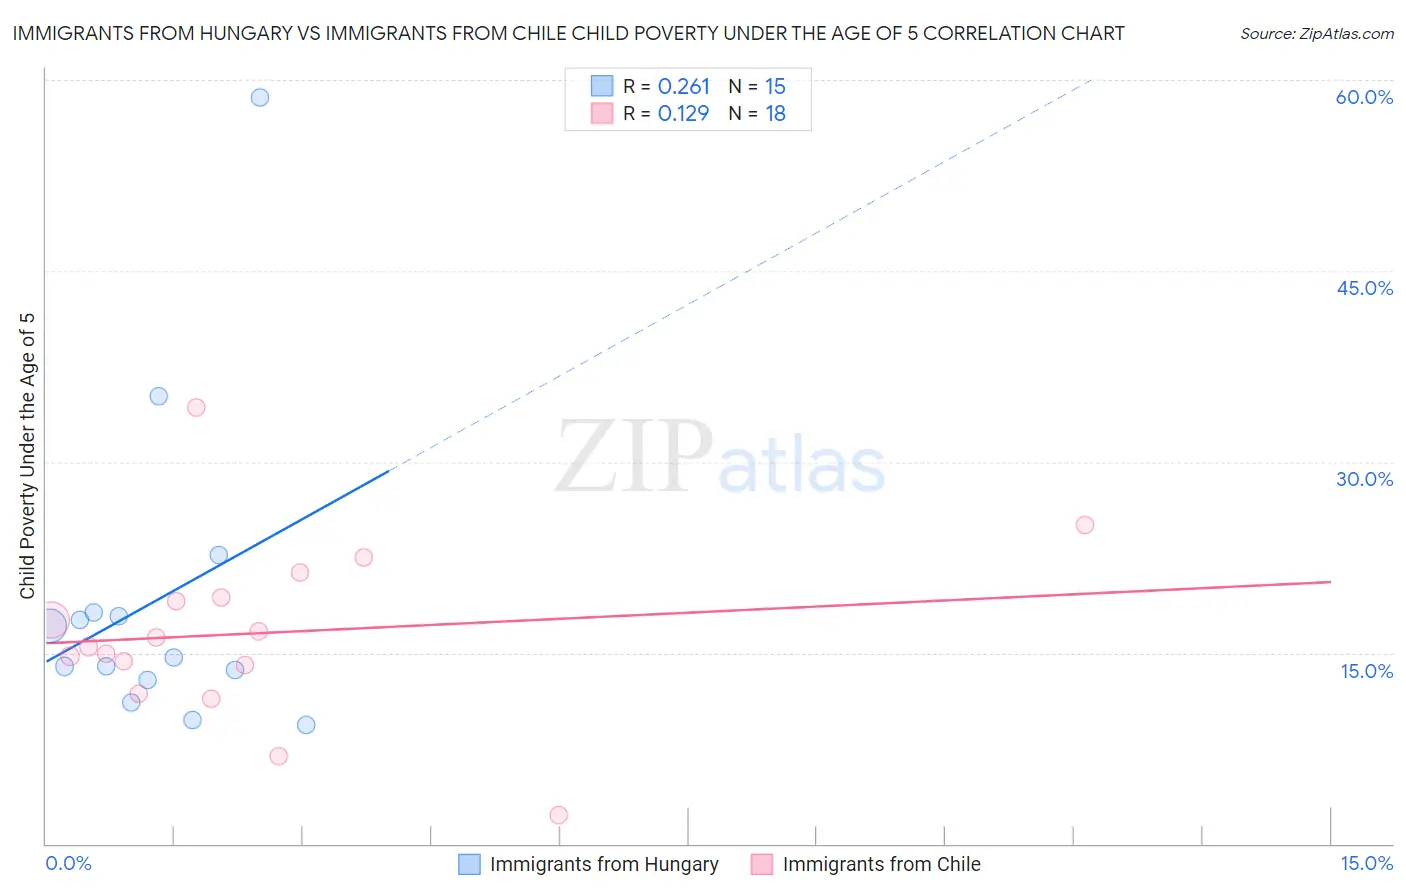 Immigrants from Hungary vs Immigrants from Chile Child Poverty Under the Age of 5